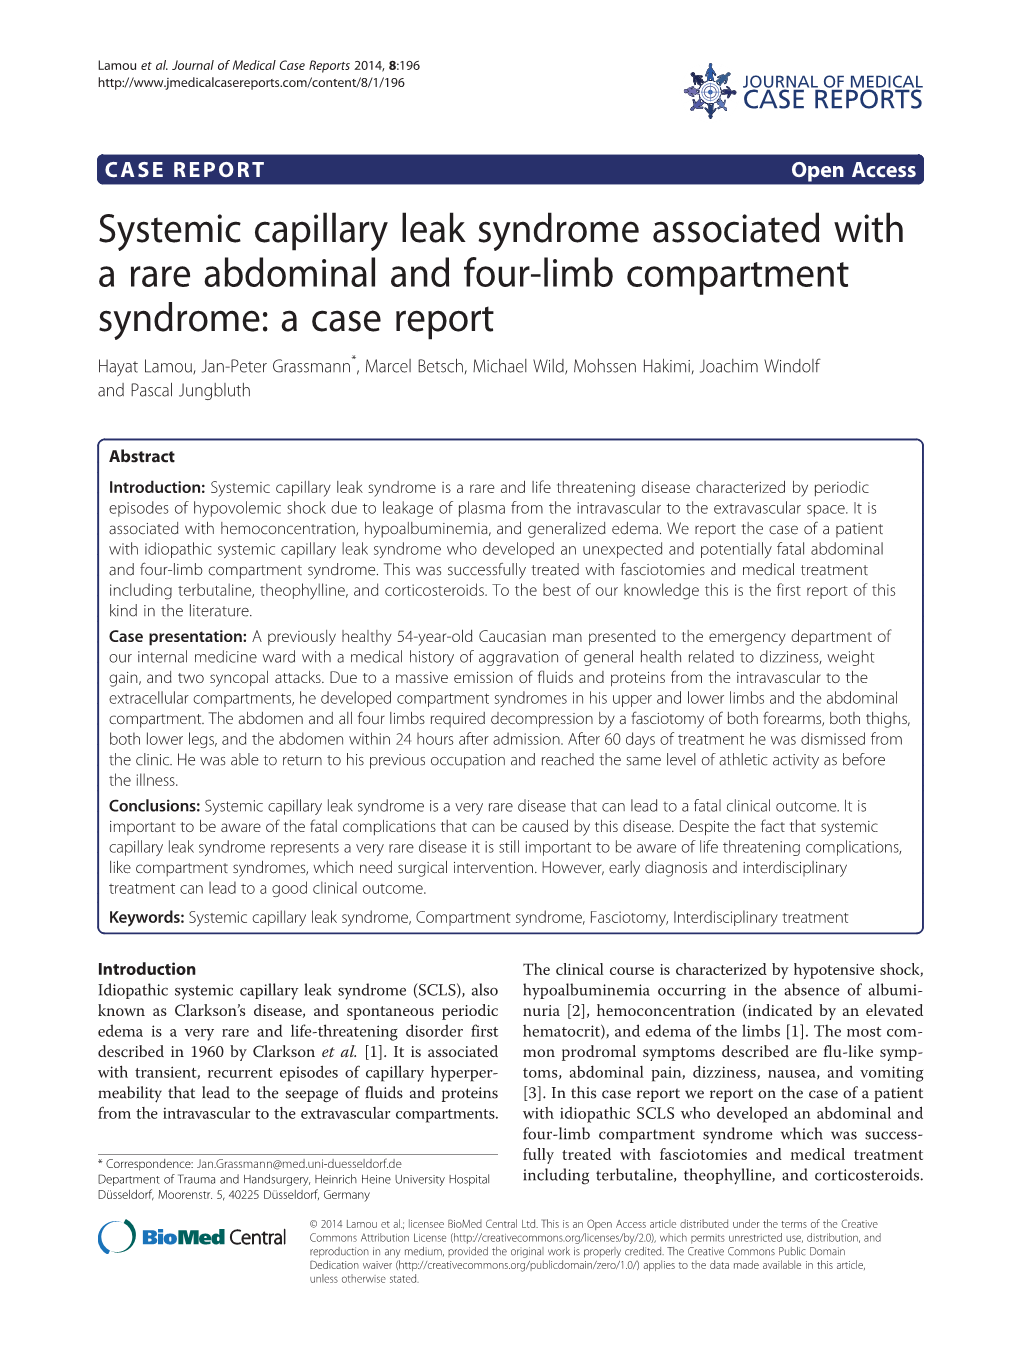 Systemic Capillary Leak Syndrome Associated with a Rare Abdominal